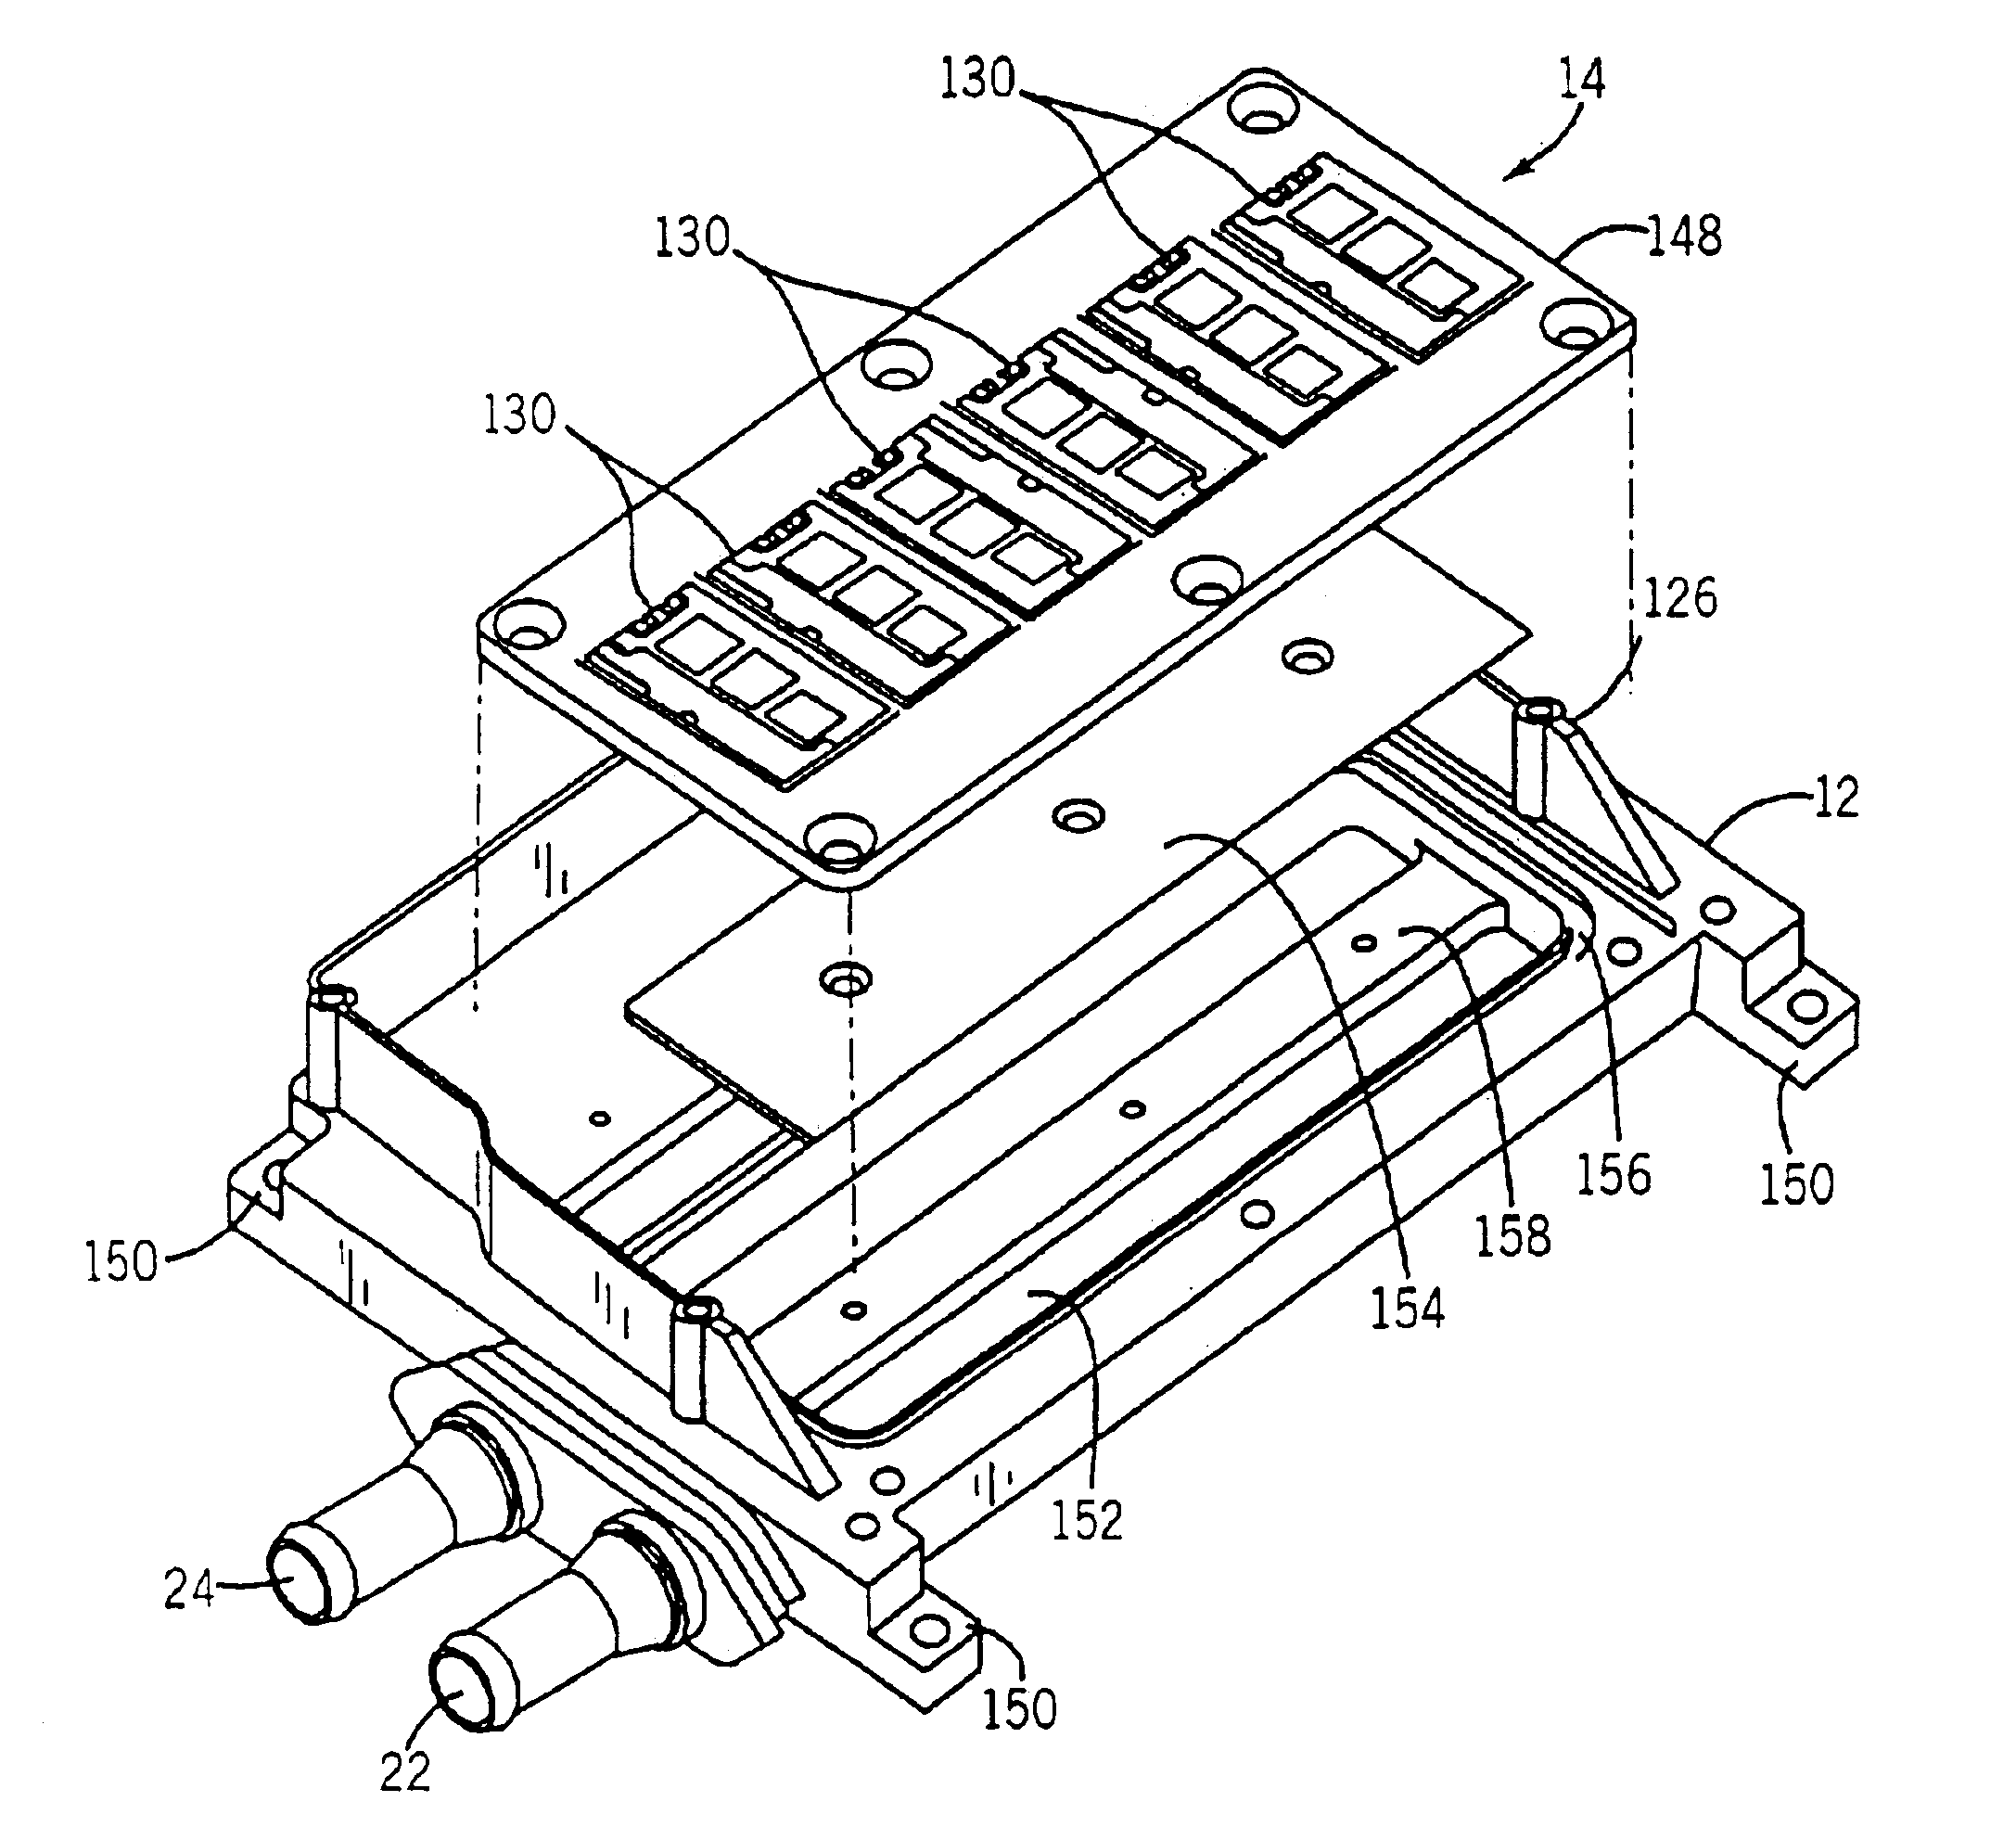 Compact fluid cooled power converter supporting multiple circuit boards